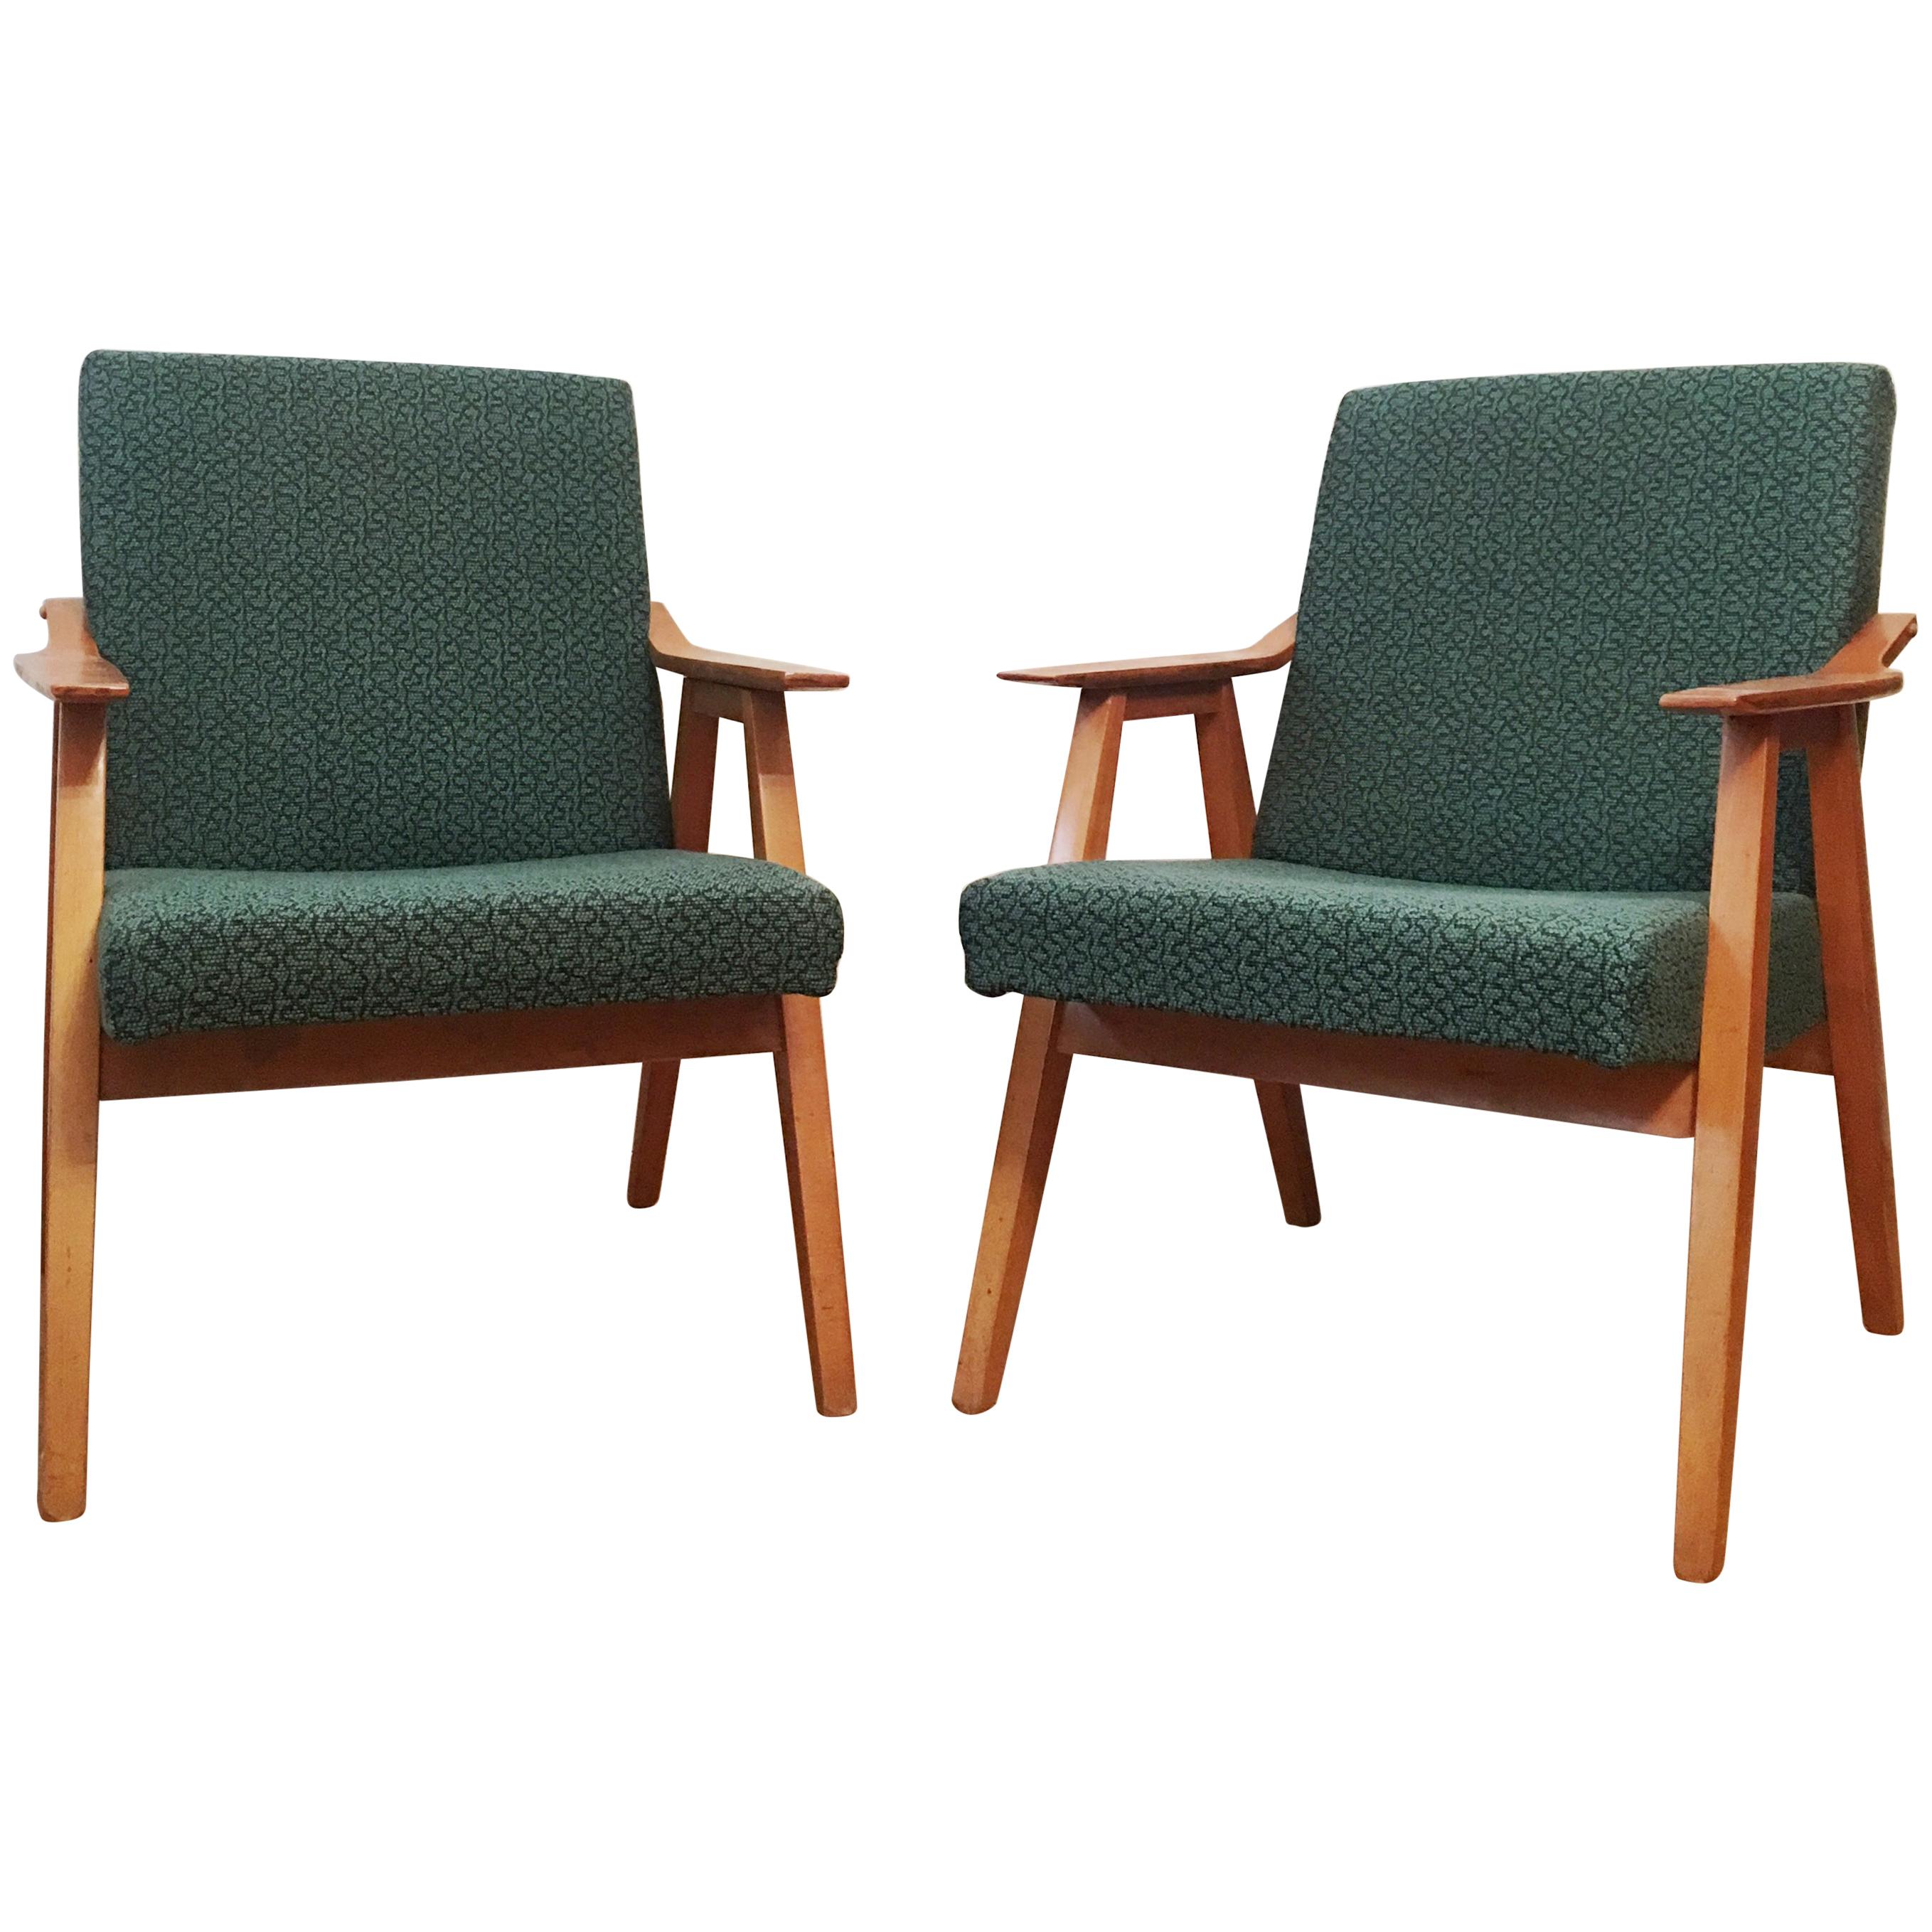 Green Vintage Armchairs, 1960s, Pair For Sale